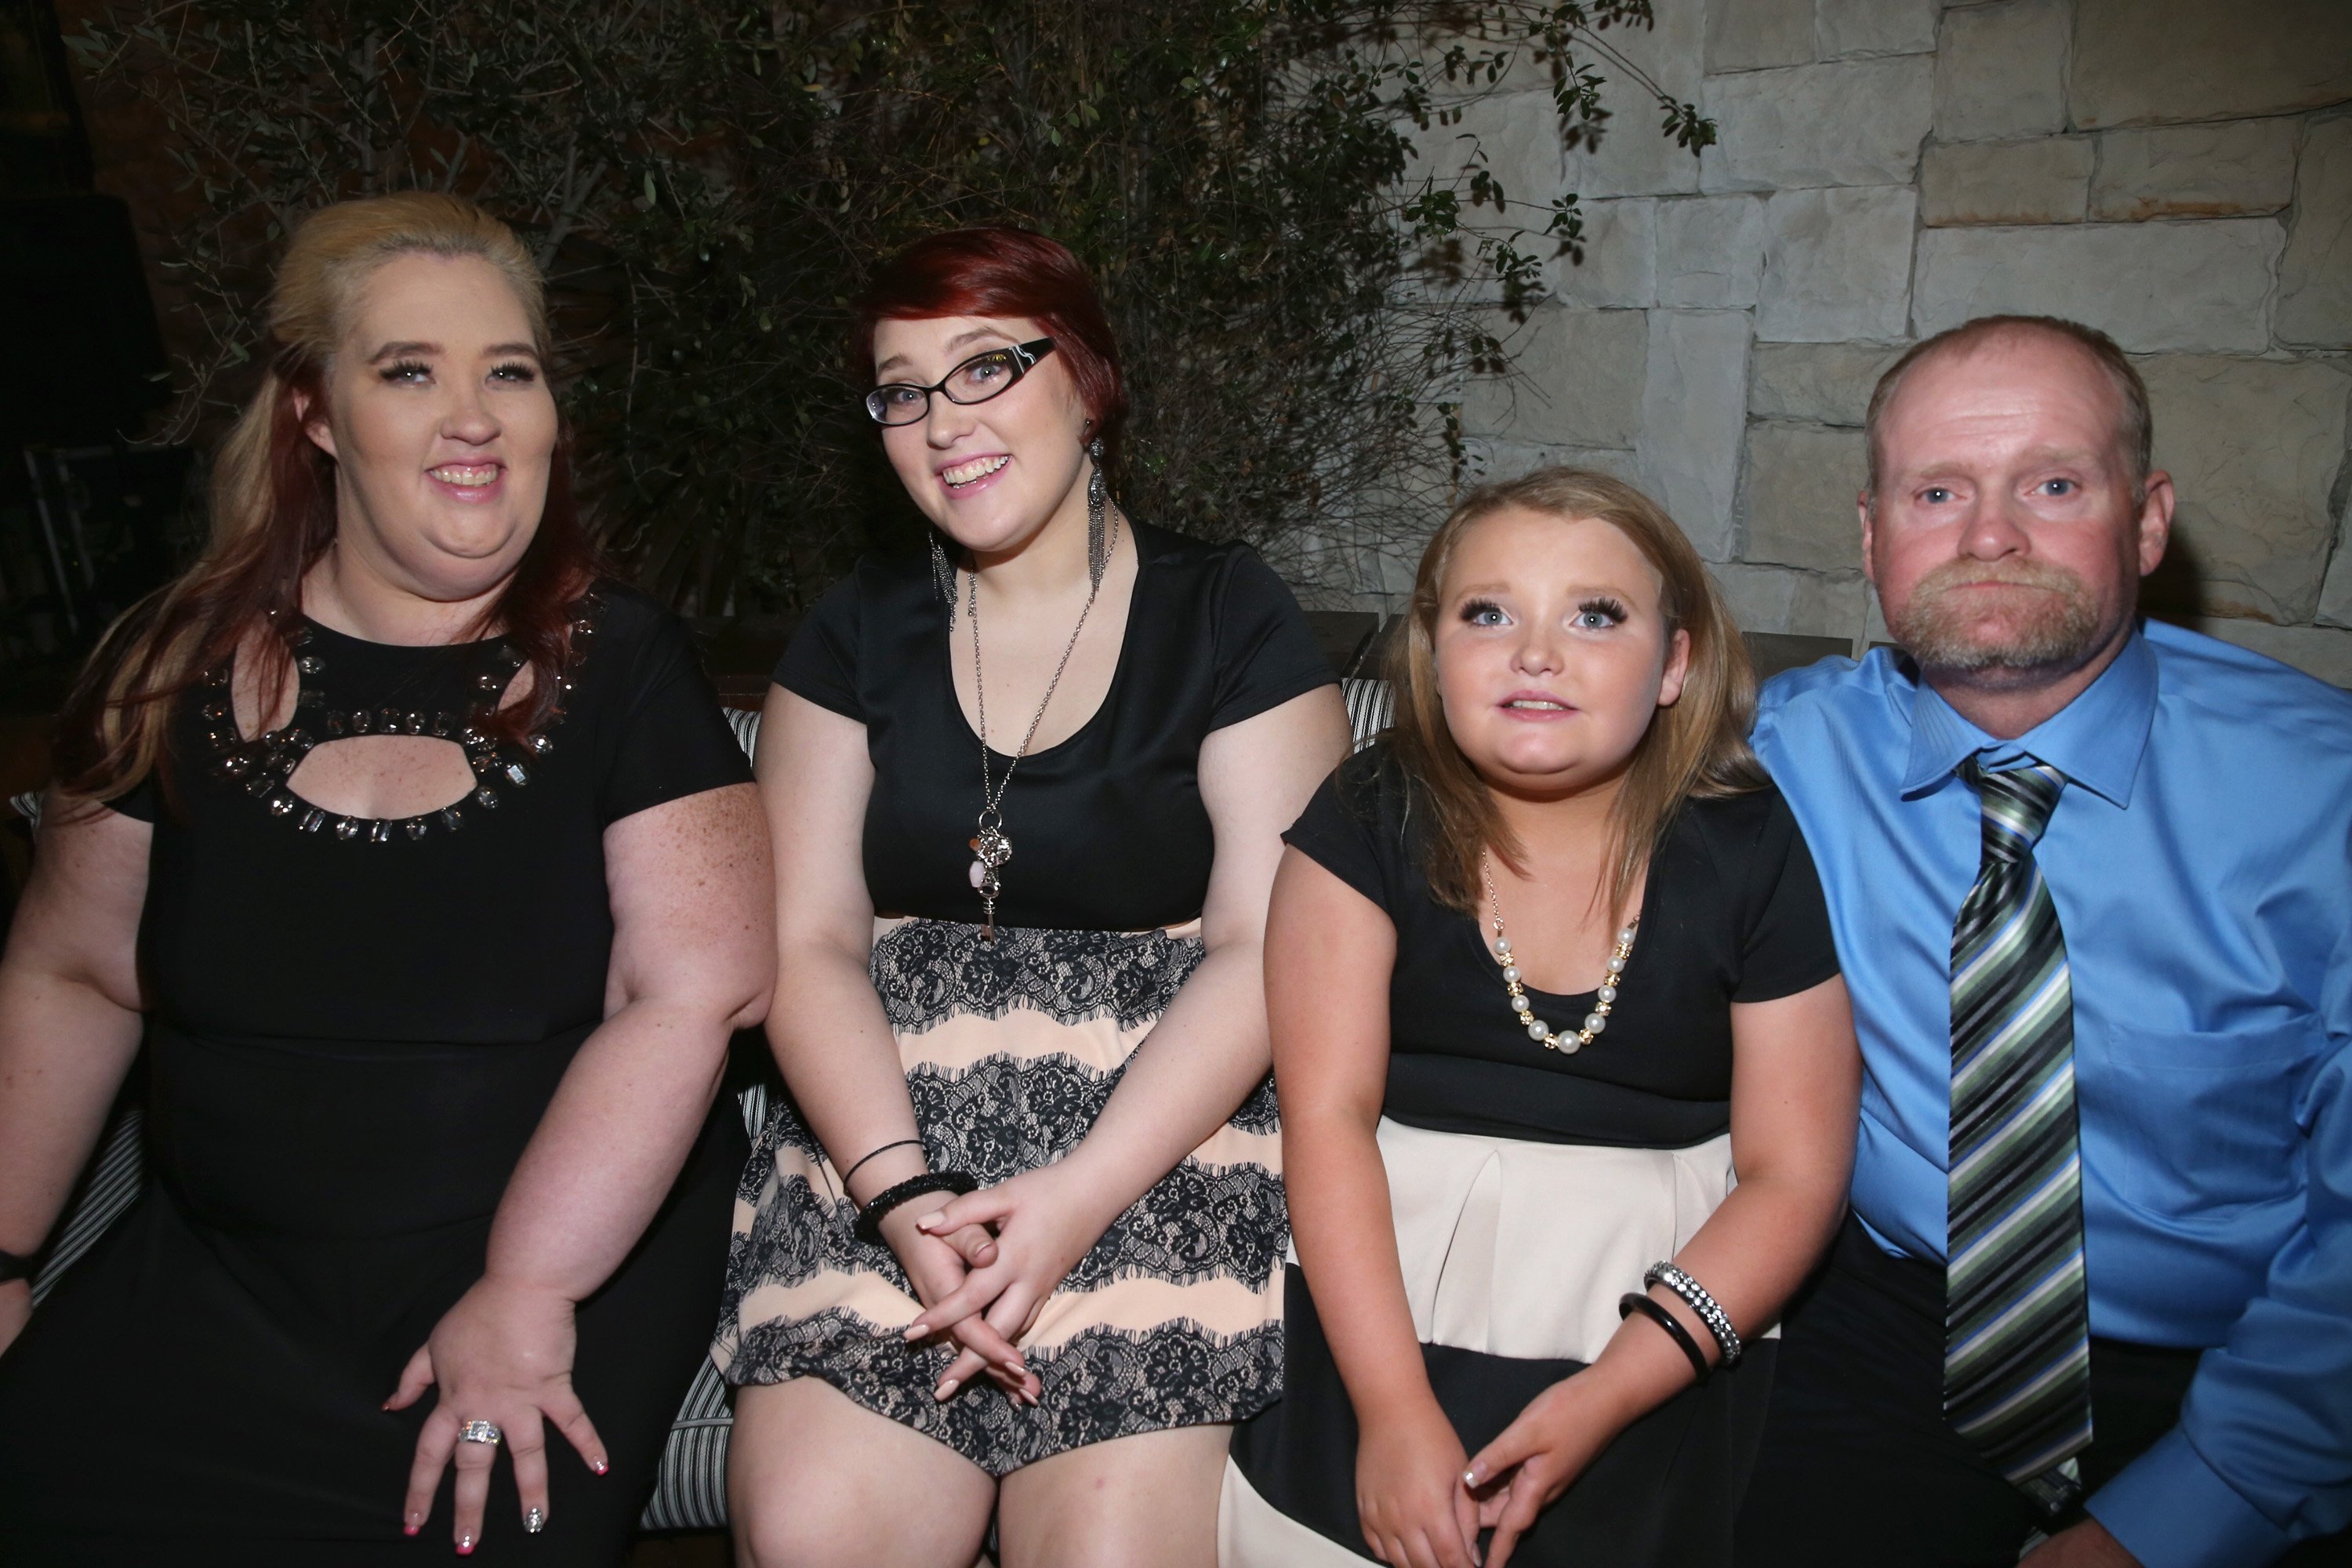 Mama June, Pumpkin, Honey Boo Boo and Sugar Bear at the premiere of "Marriage Boot Camp" Reality Stars on November 19, 2015 | Photo: GettyImages